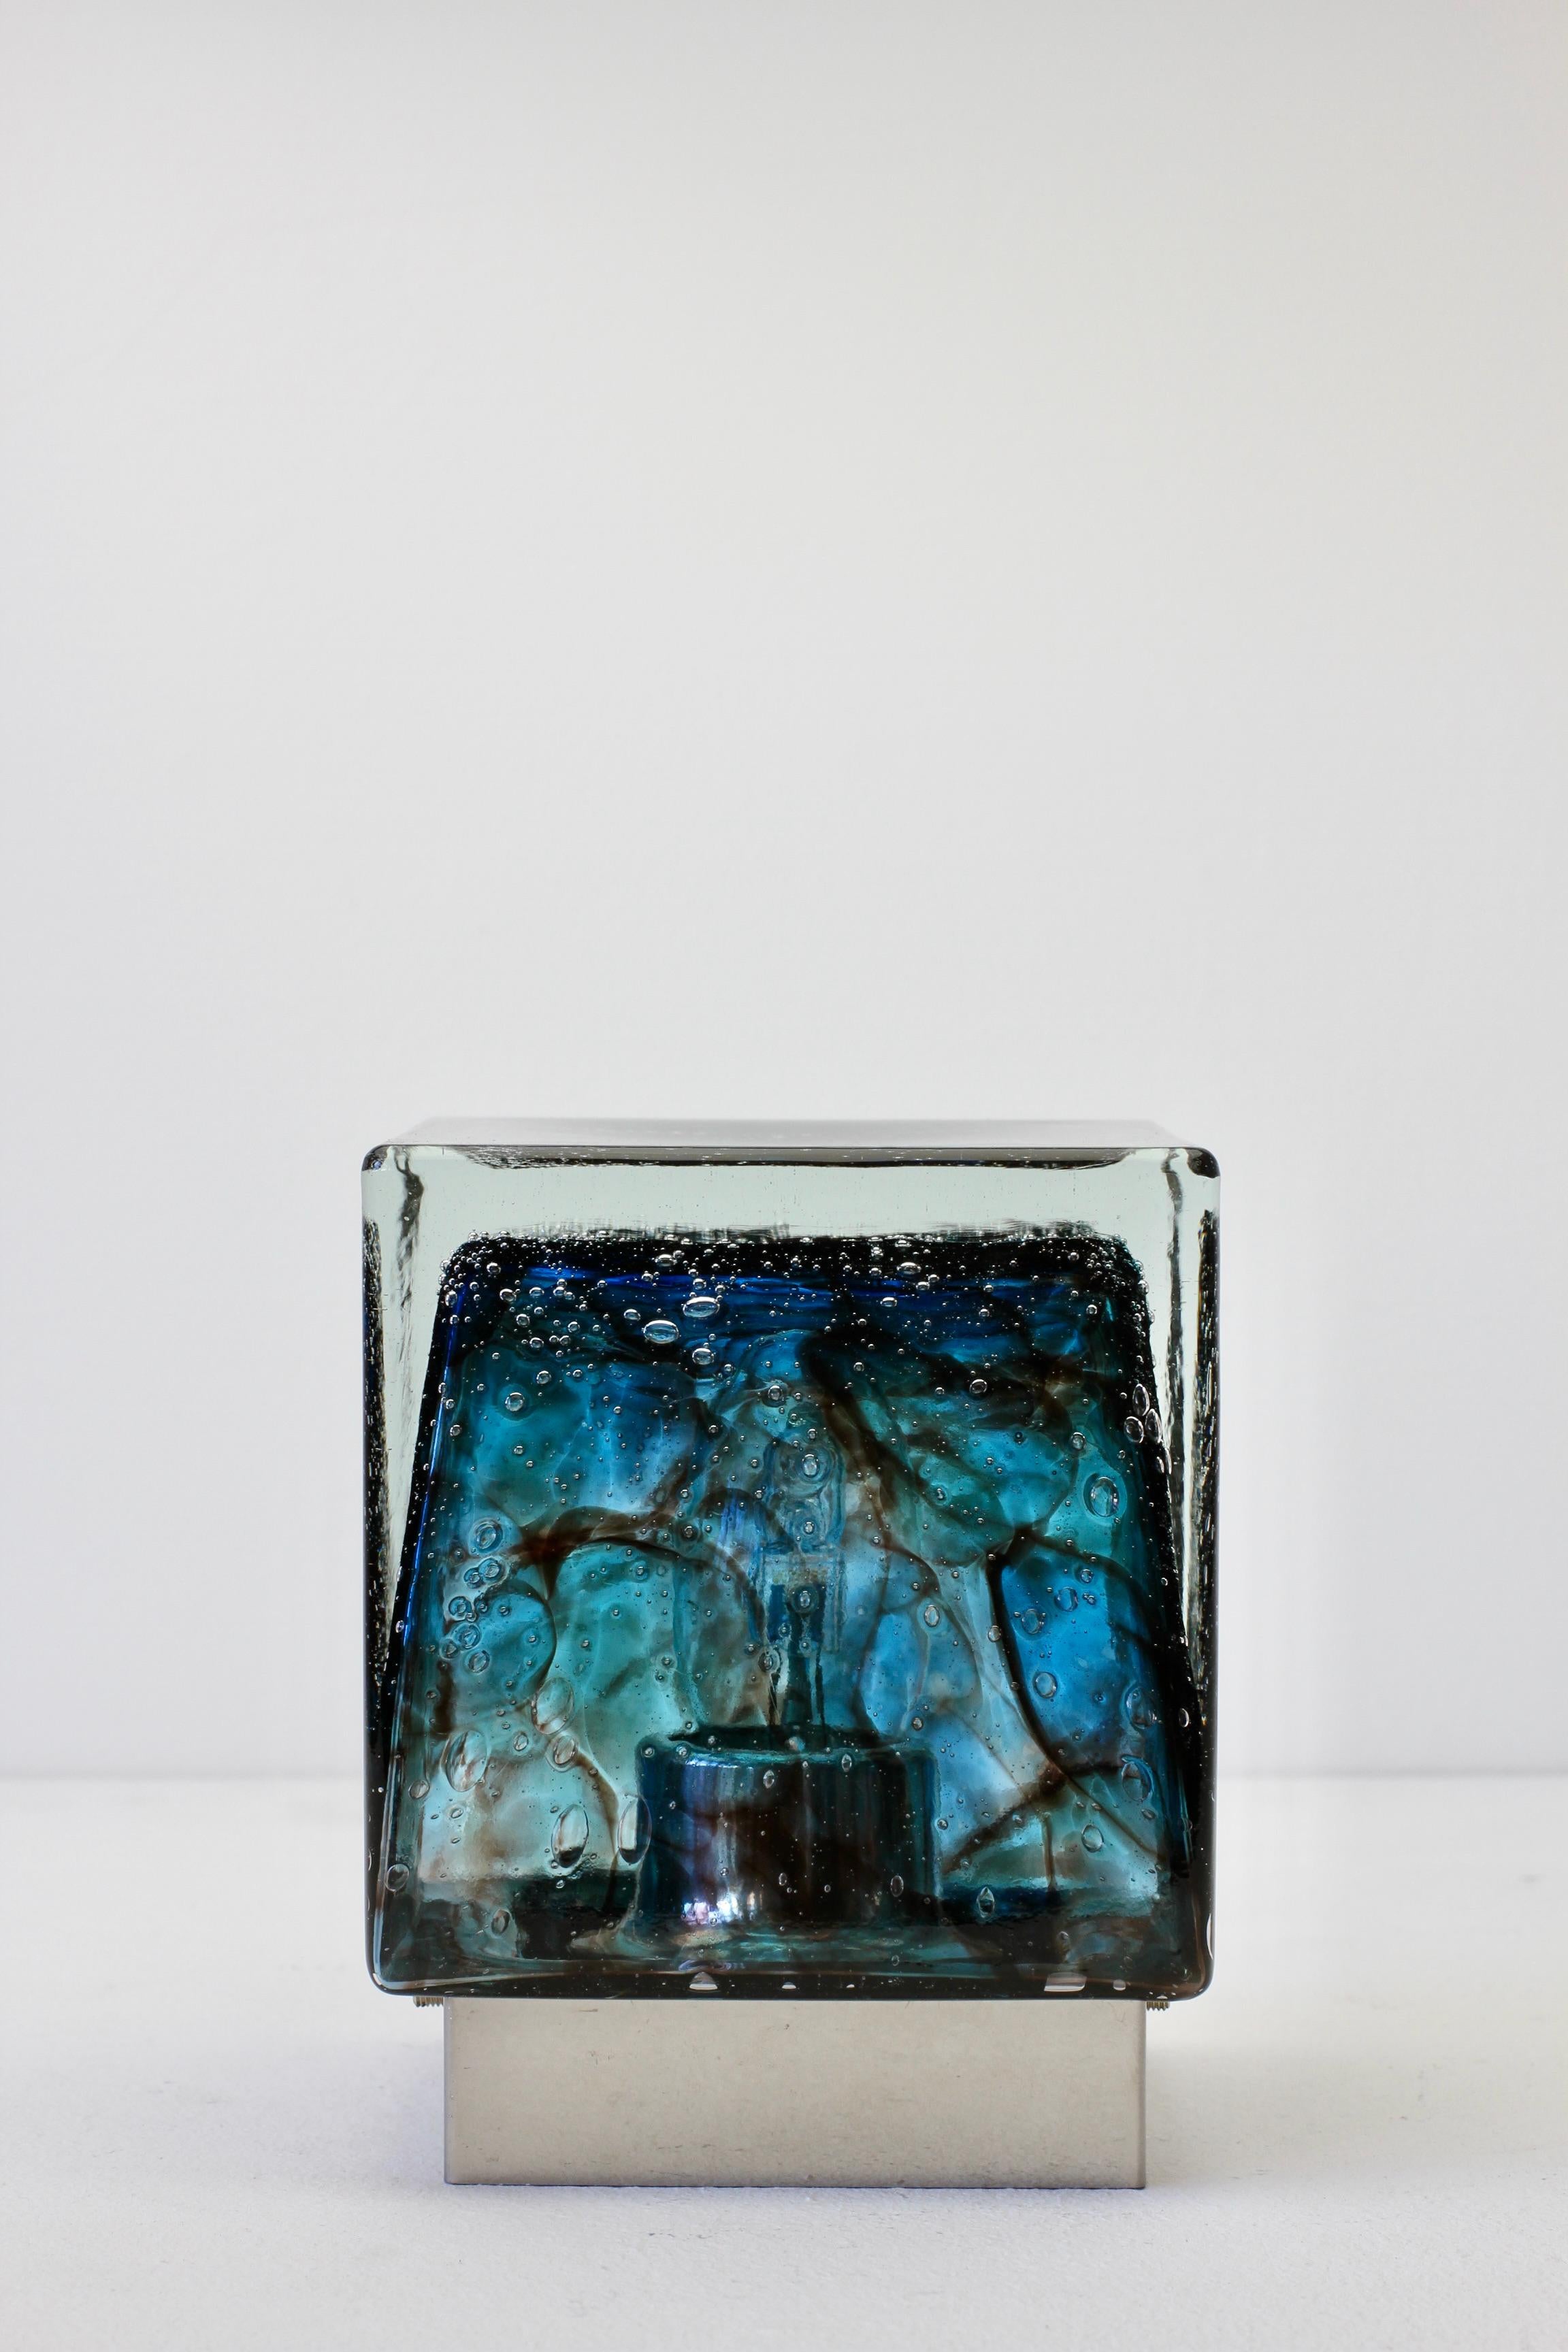 Beautiful and very rare mid-century blue bubble glass square / cube flush mount wall light or sconce with minimalist chrome plated metal backplate by Glashütte Limburg, Germany. Made in the later half of the 1970s to early 1980s, this gorgeous wall